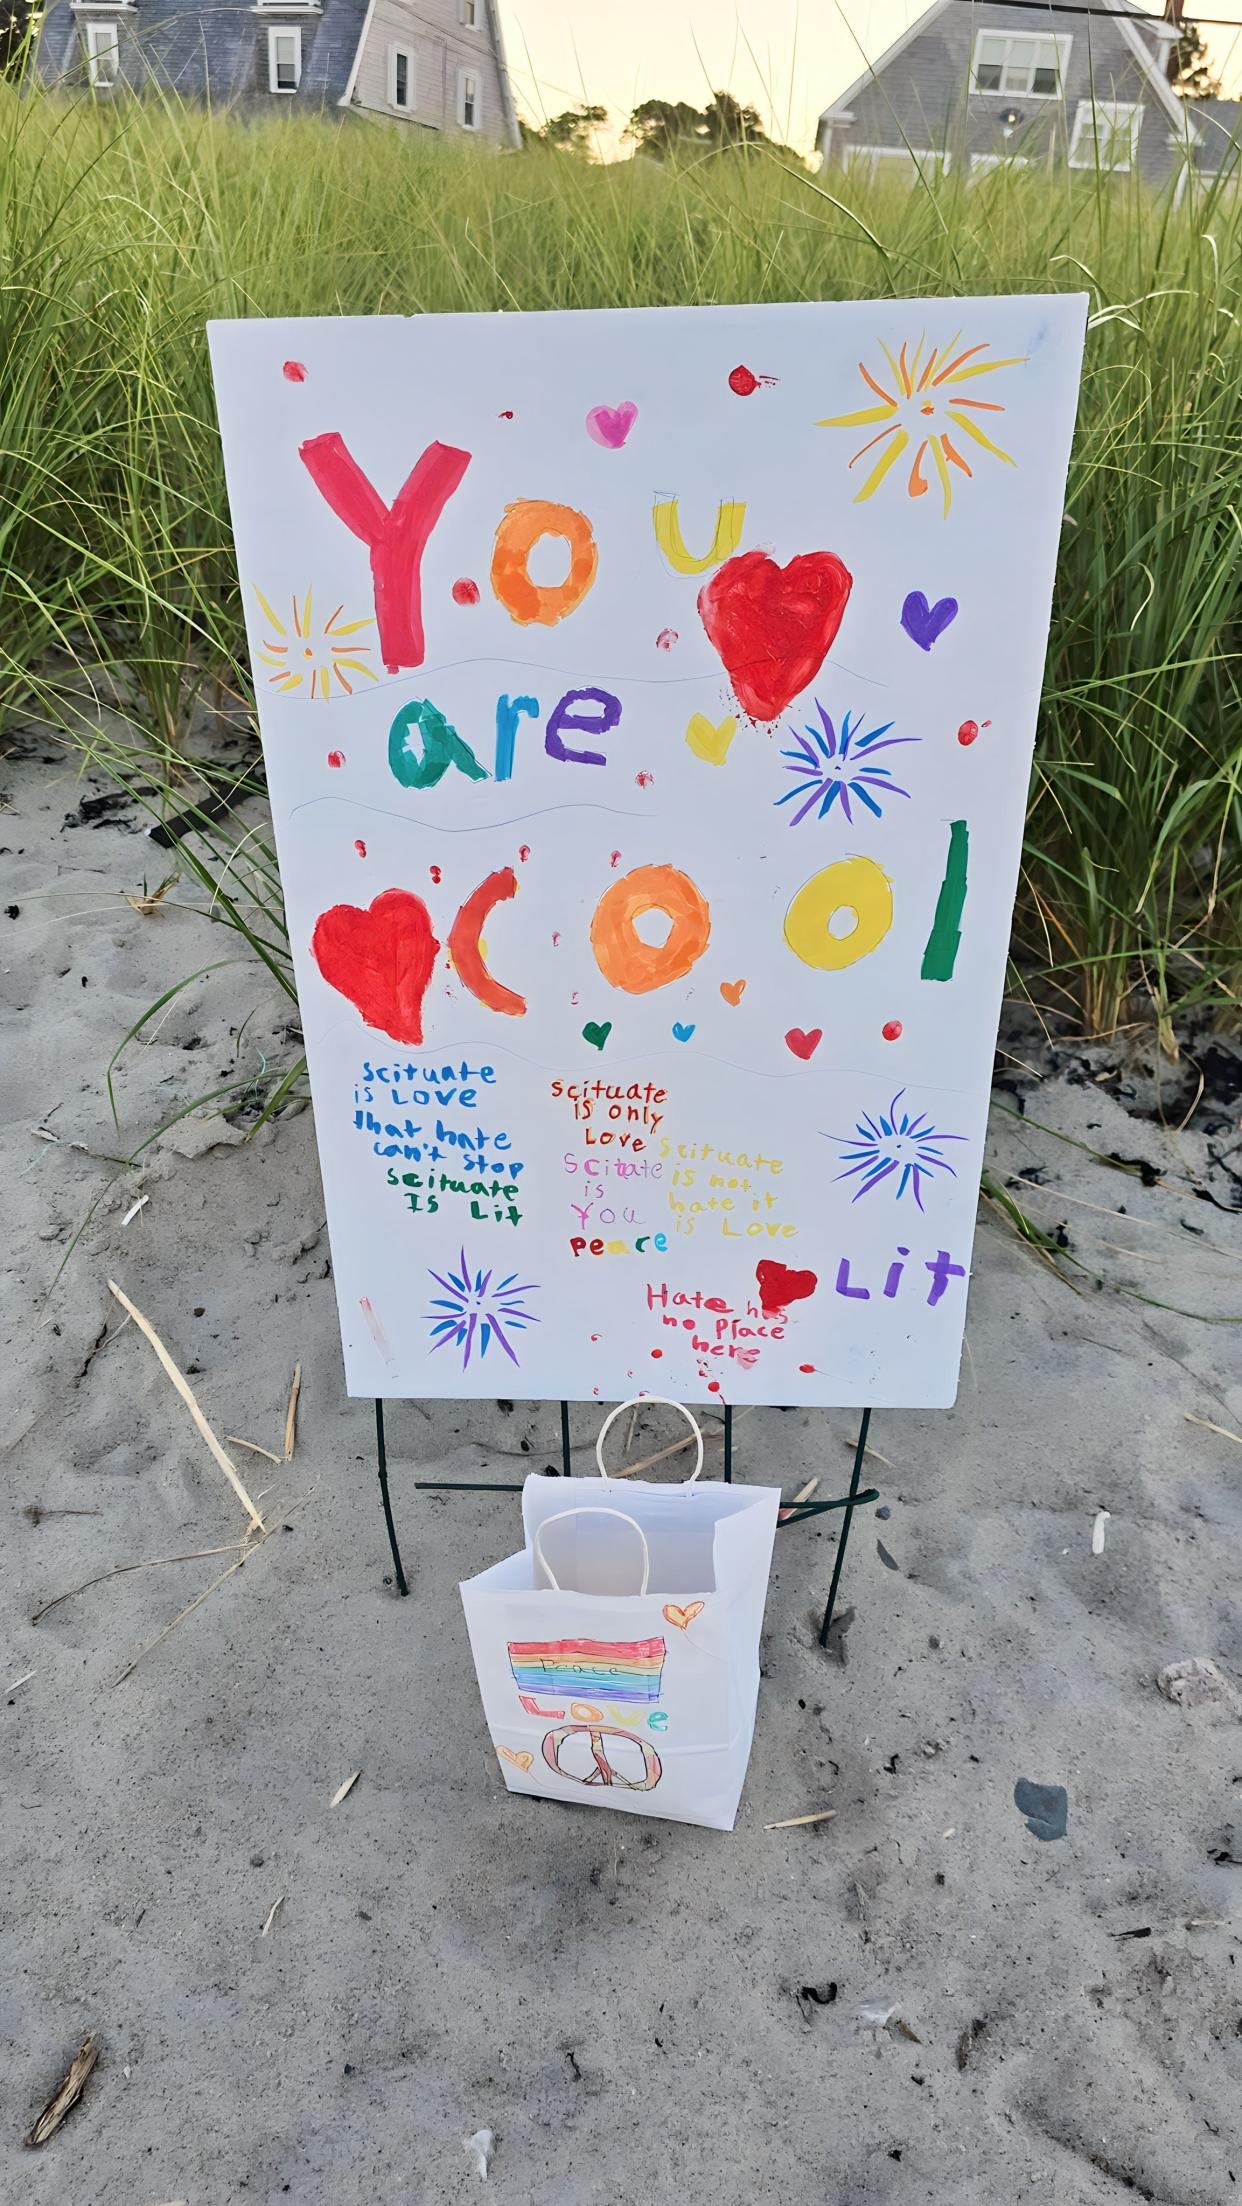 Scituate residents placed illuminated lanterns along the seashore in support of Scituate Public Schools Diversity, Equity and Inclusion Director jamele adams, who was the target of a hateful message in July.